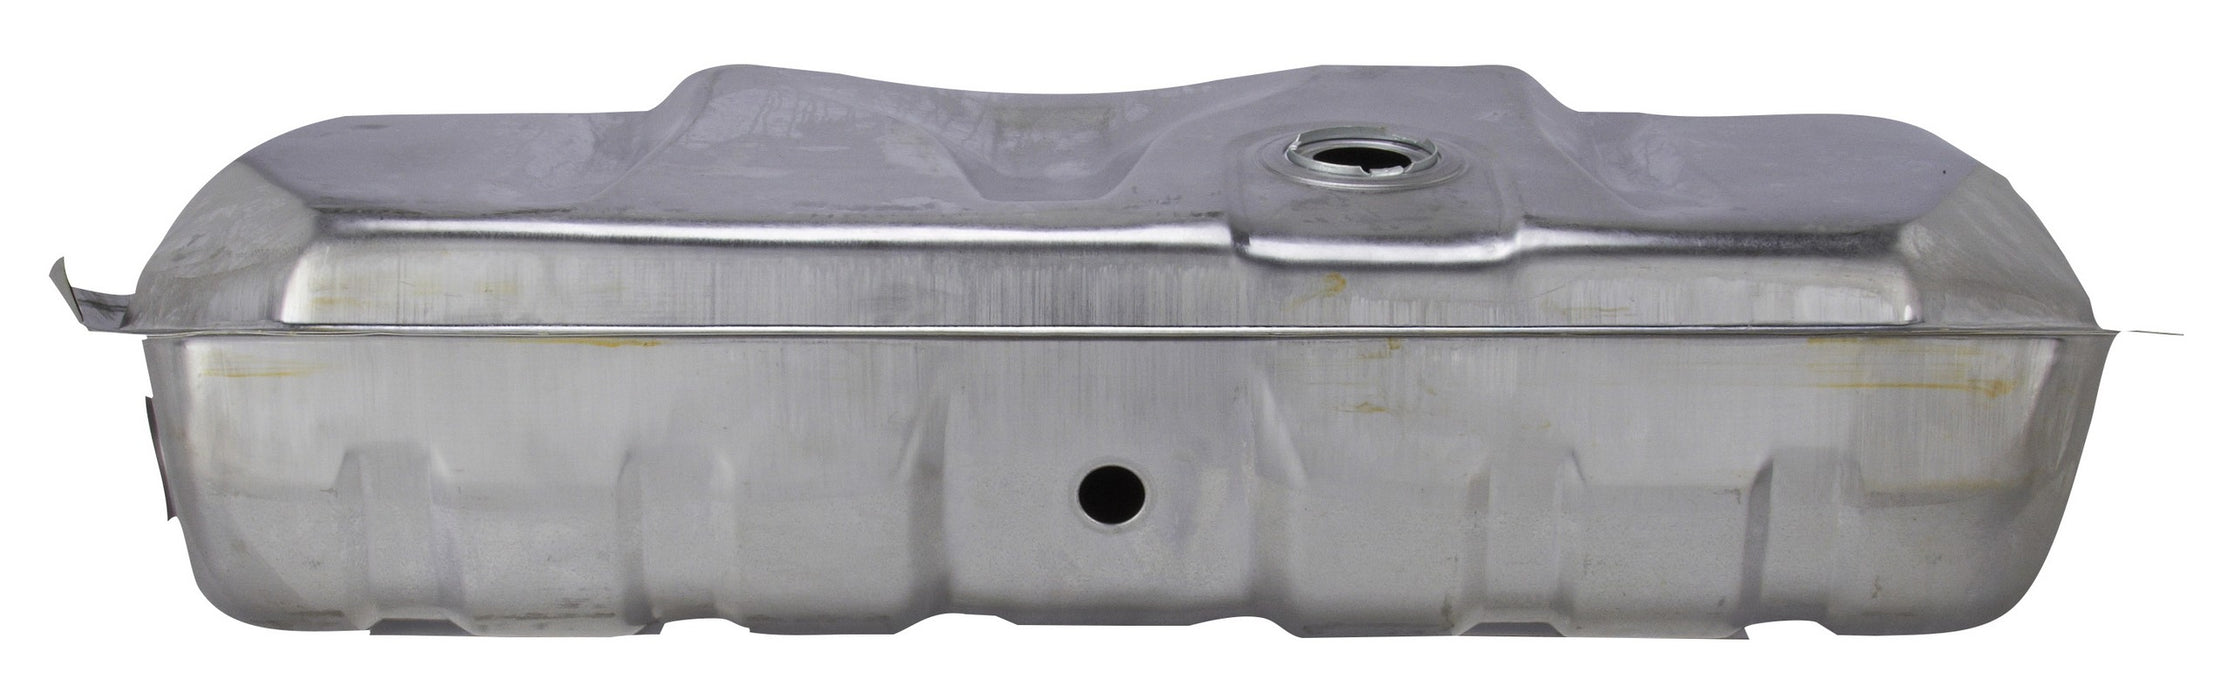 Fuel Tank for Lincoln Continental 1982 1981 1980 - Spectra F3